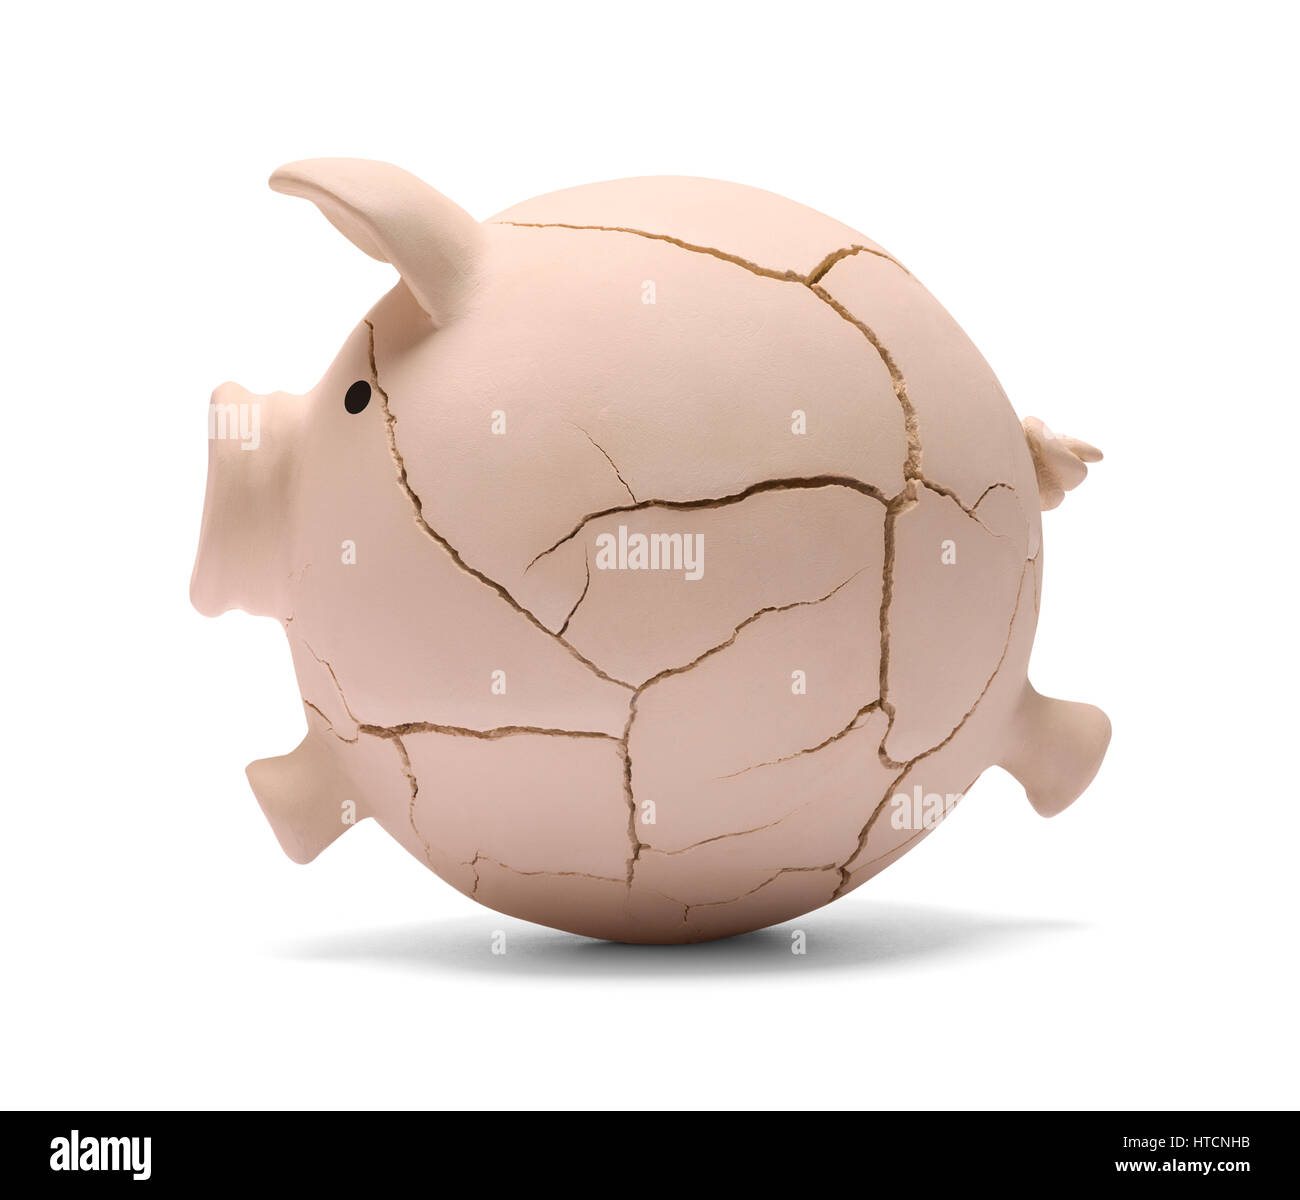 Fully Stuffed Pibby Bank That is Breaking Apart Isolated on White Background. Stock Photo